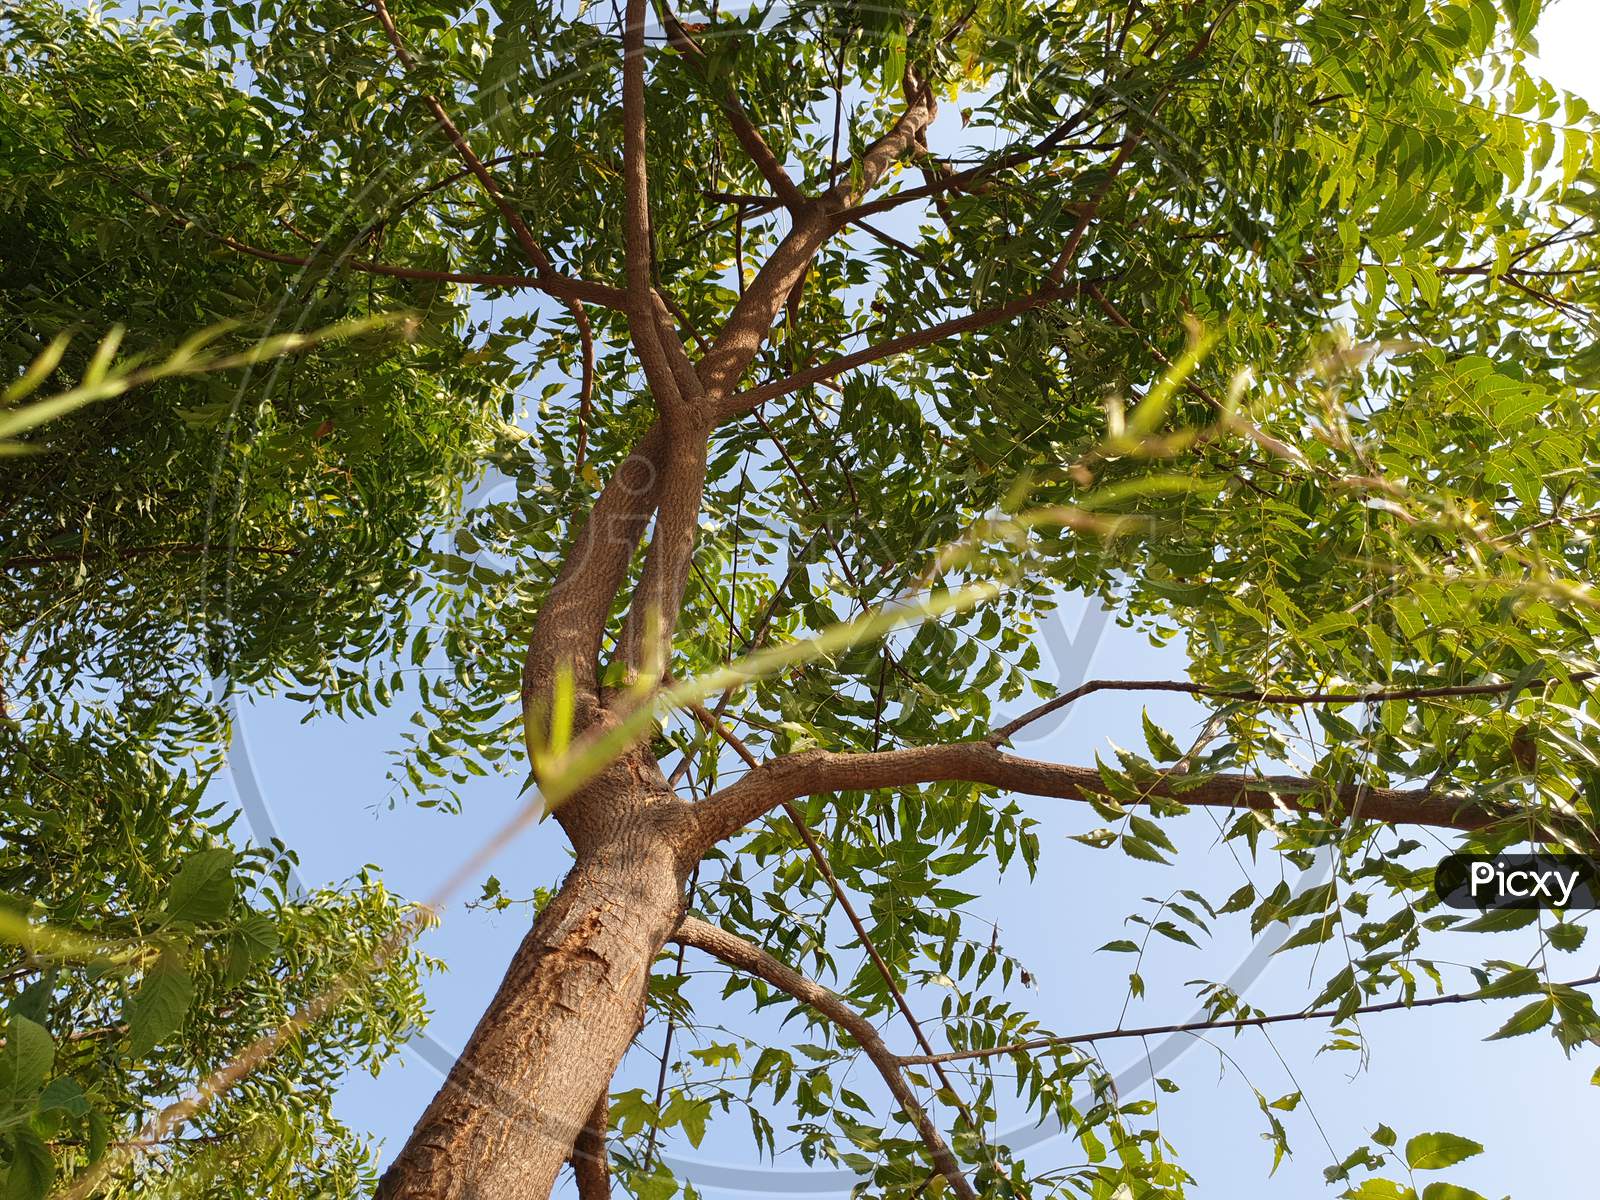 Green neem tree in the forest